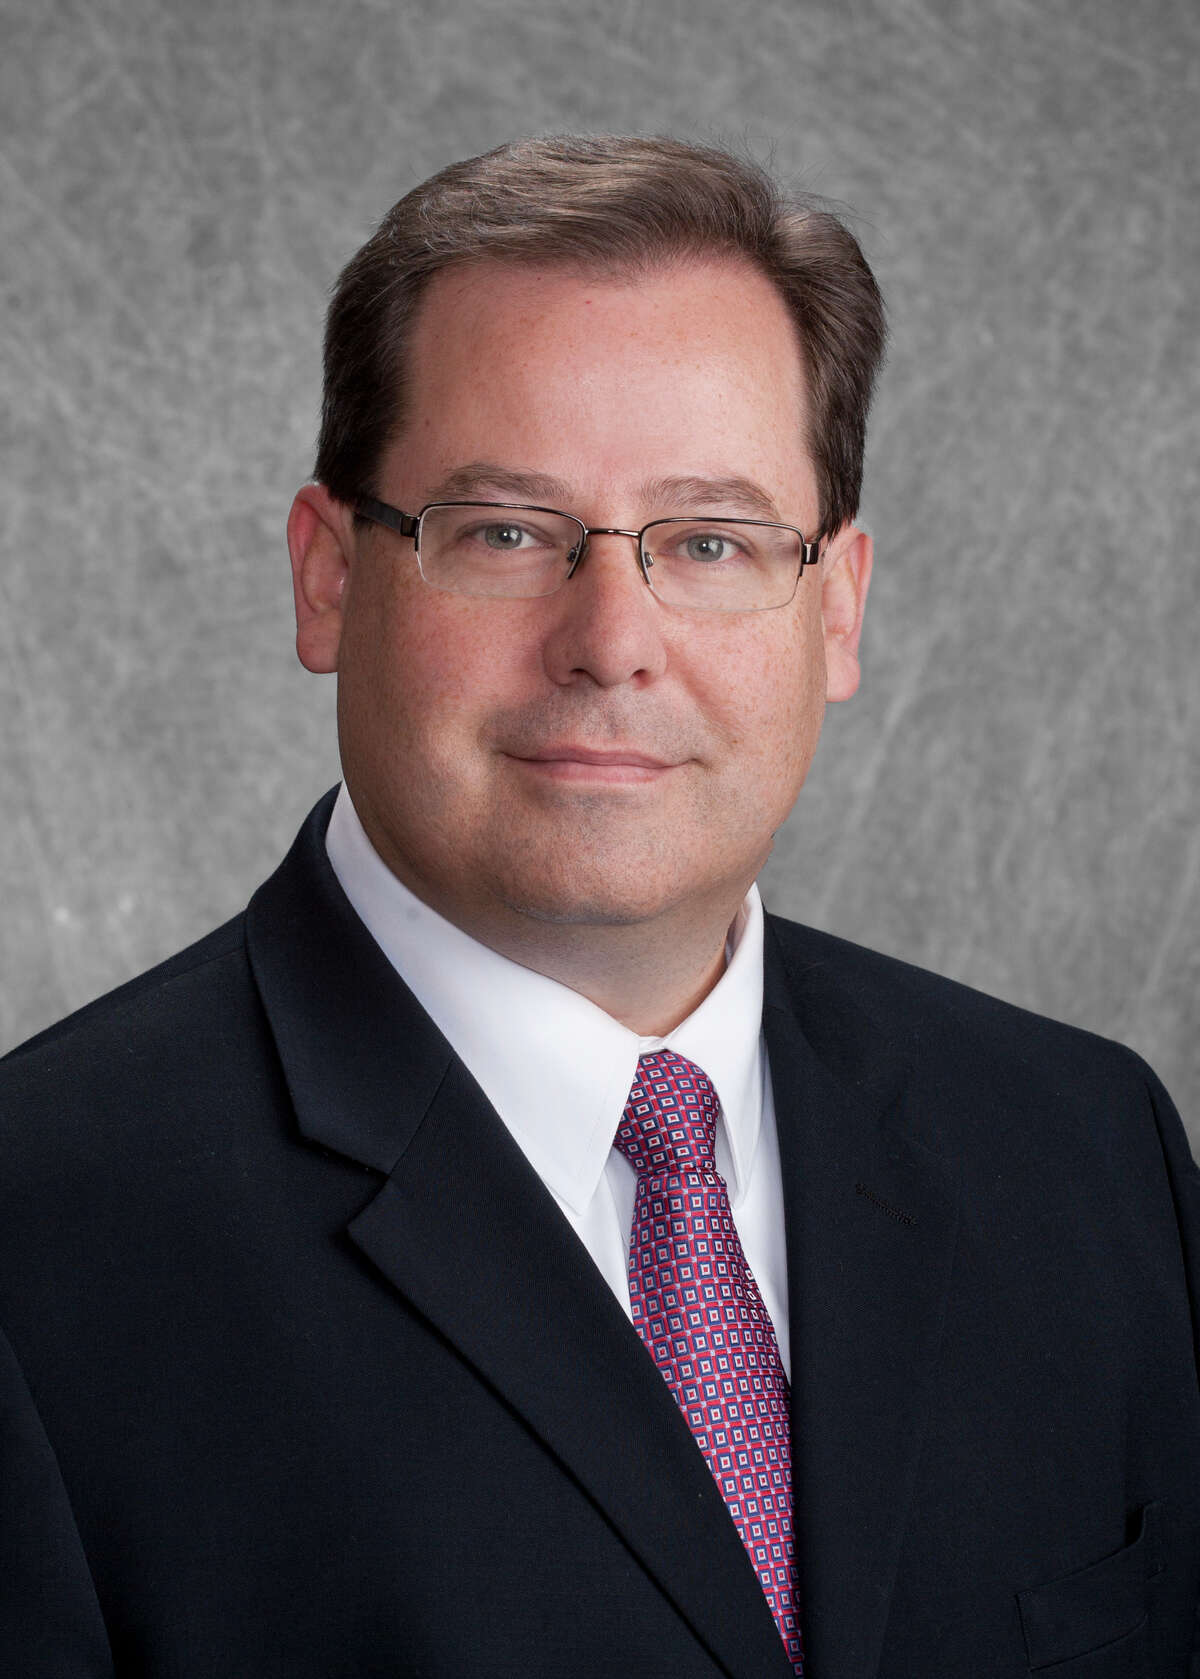 Vorys, Sater, Seymour and Pease announced that Randell J. Gartin has joined the firm's Houston office as of counsel in the tax and probate group and will strengthen Vorys international tax capabilities.